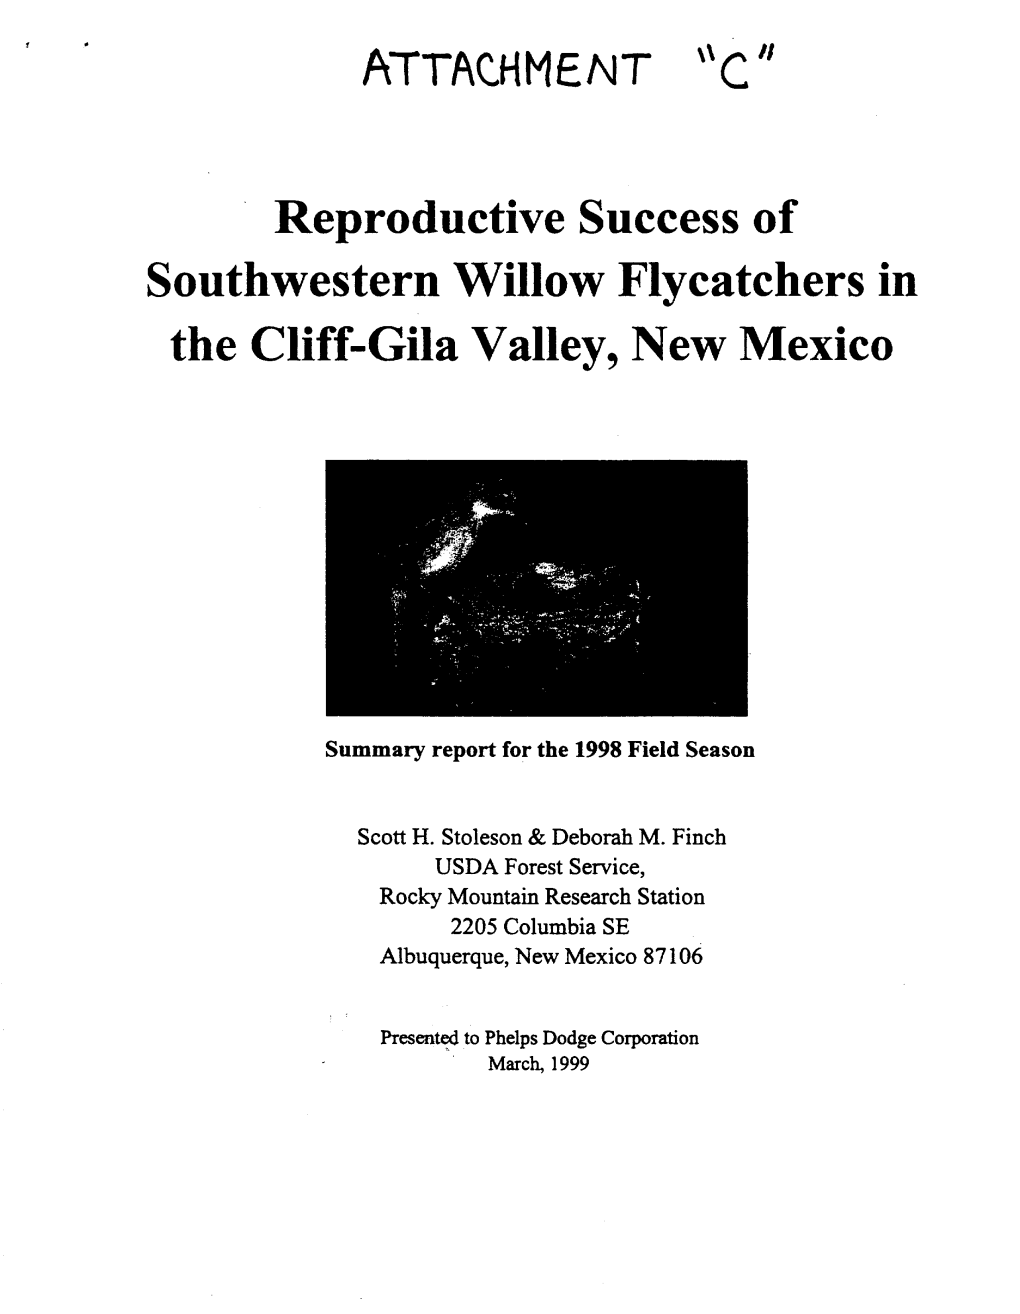 Reproductive Success of Southwestern Willow Flycatchers in the Cliff-Gila Valley, New Mexico